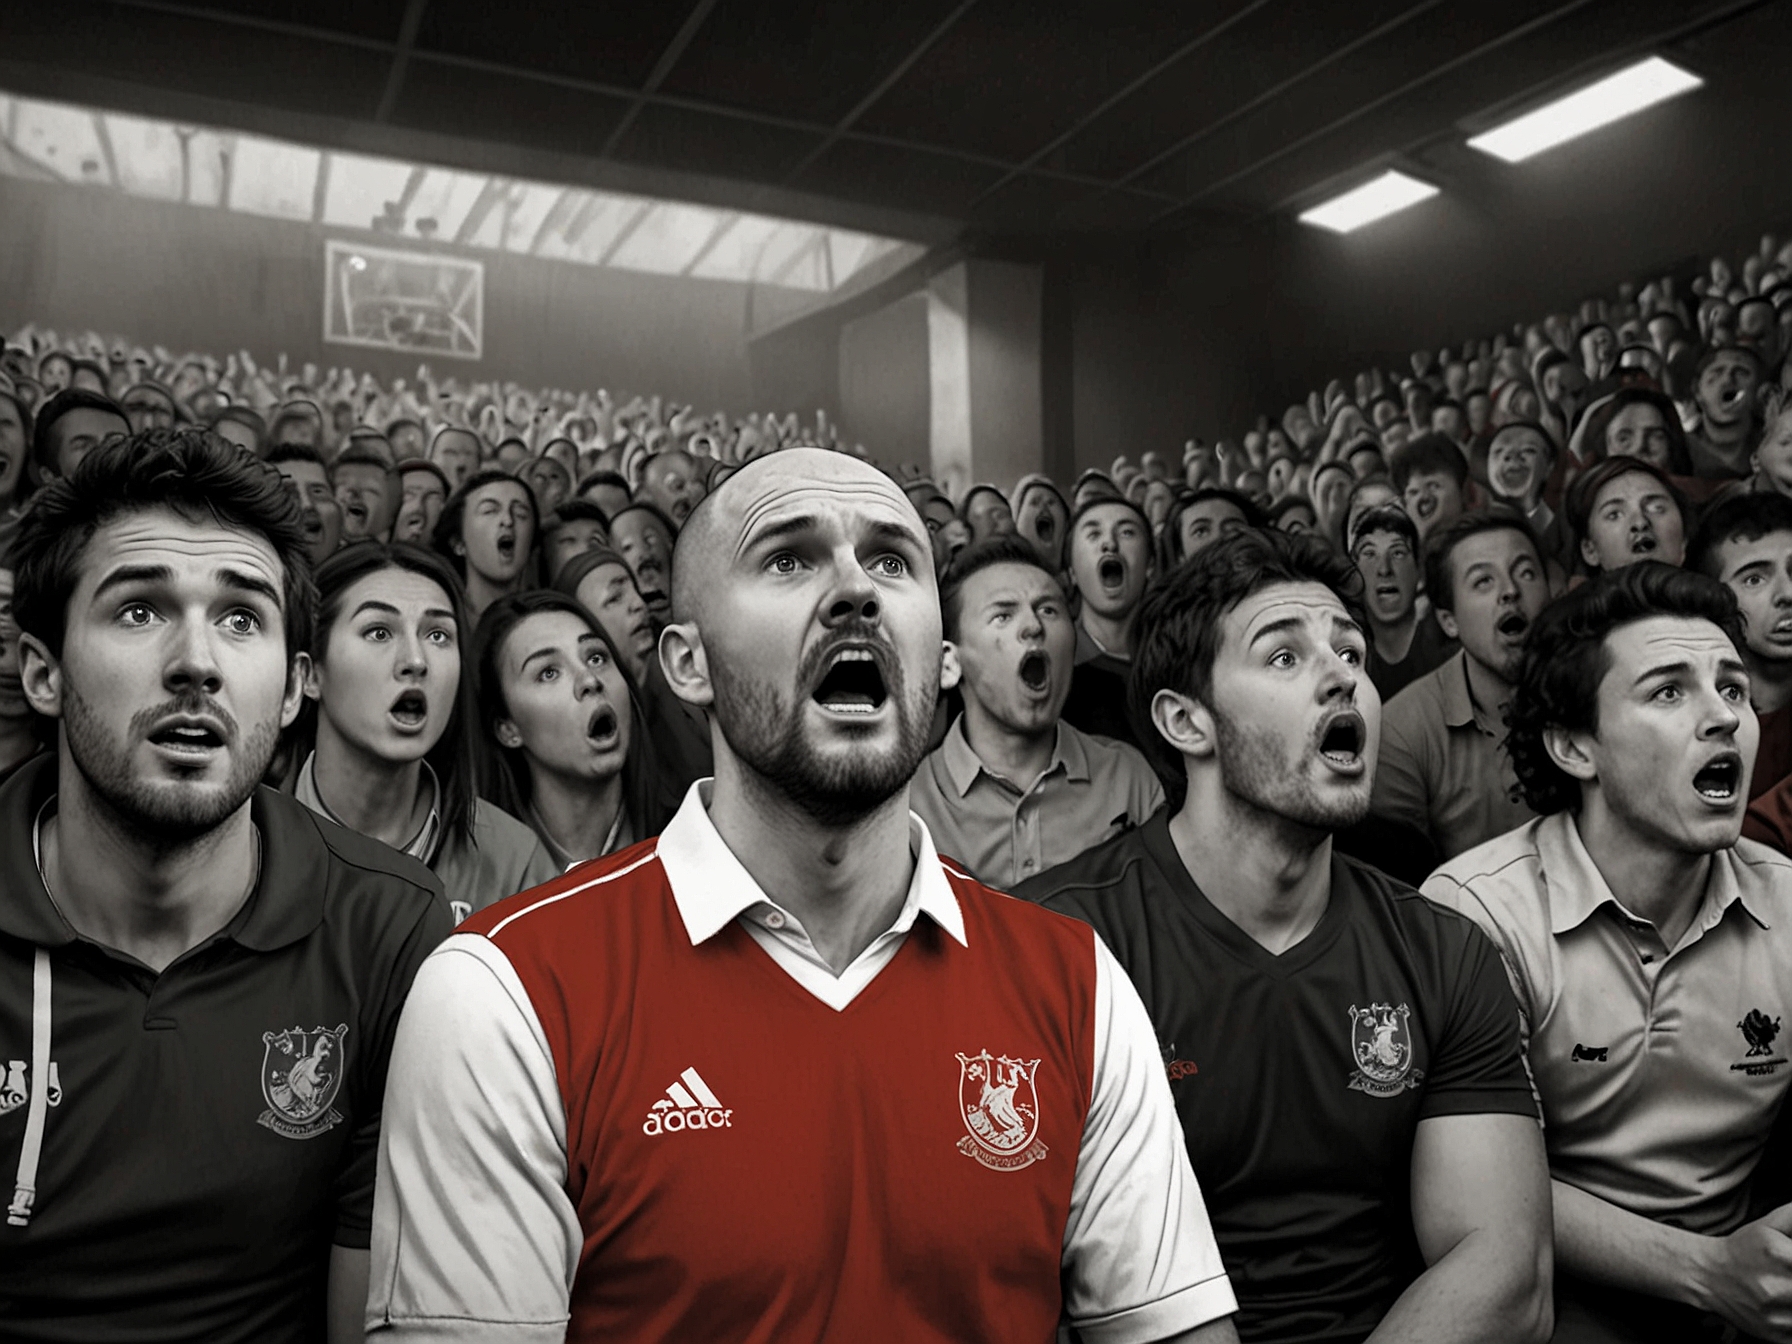 A group of Welsh football fans reacting to the announcement of Rob Page's dismissal. Some appear disappointed while others seem hopeful, symbolizing the mixed reactions to the FAW's decision.